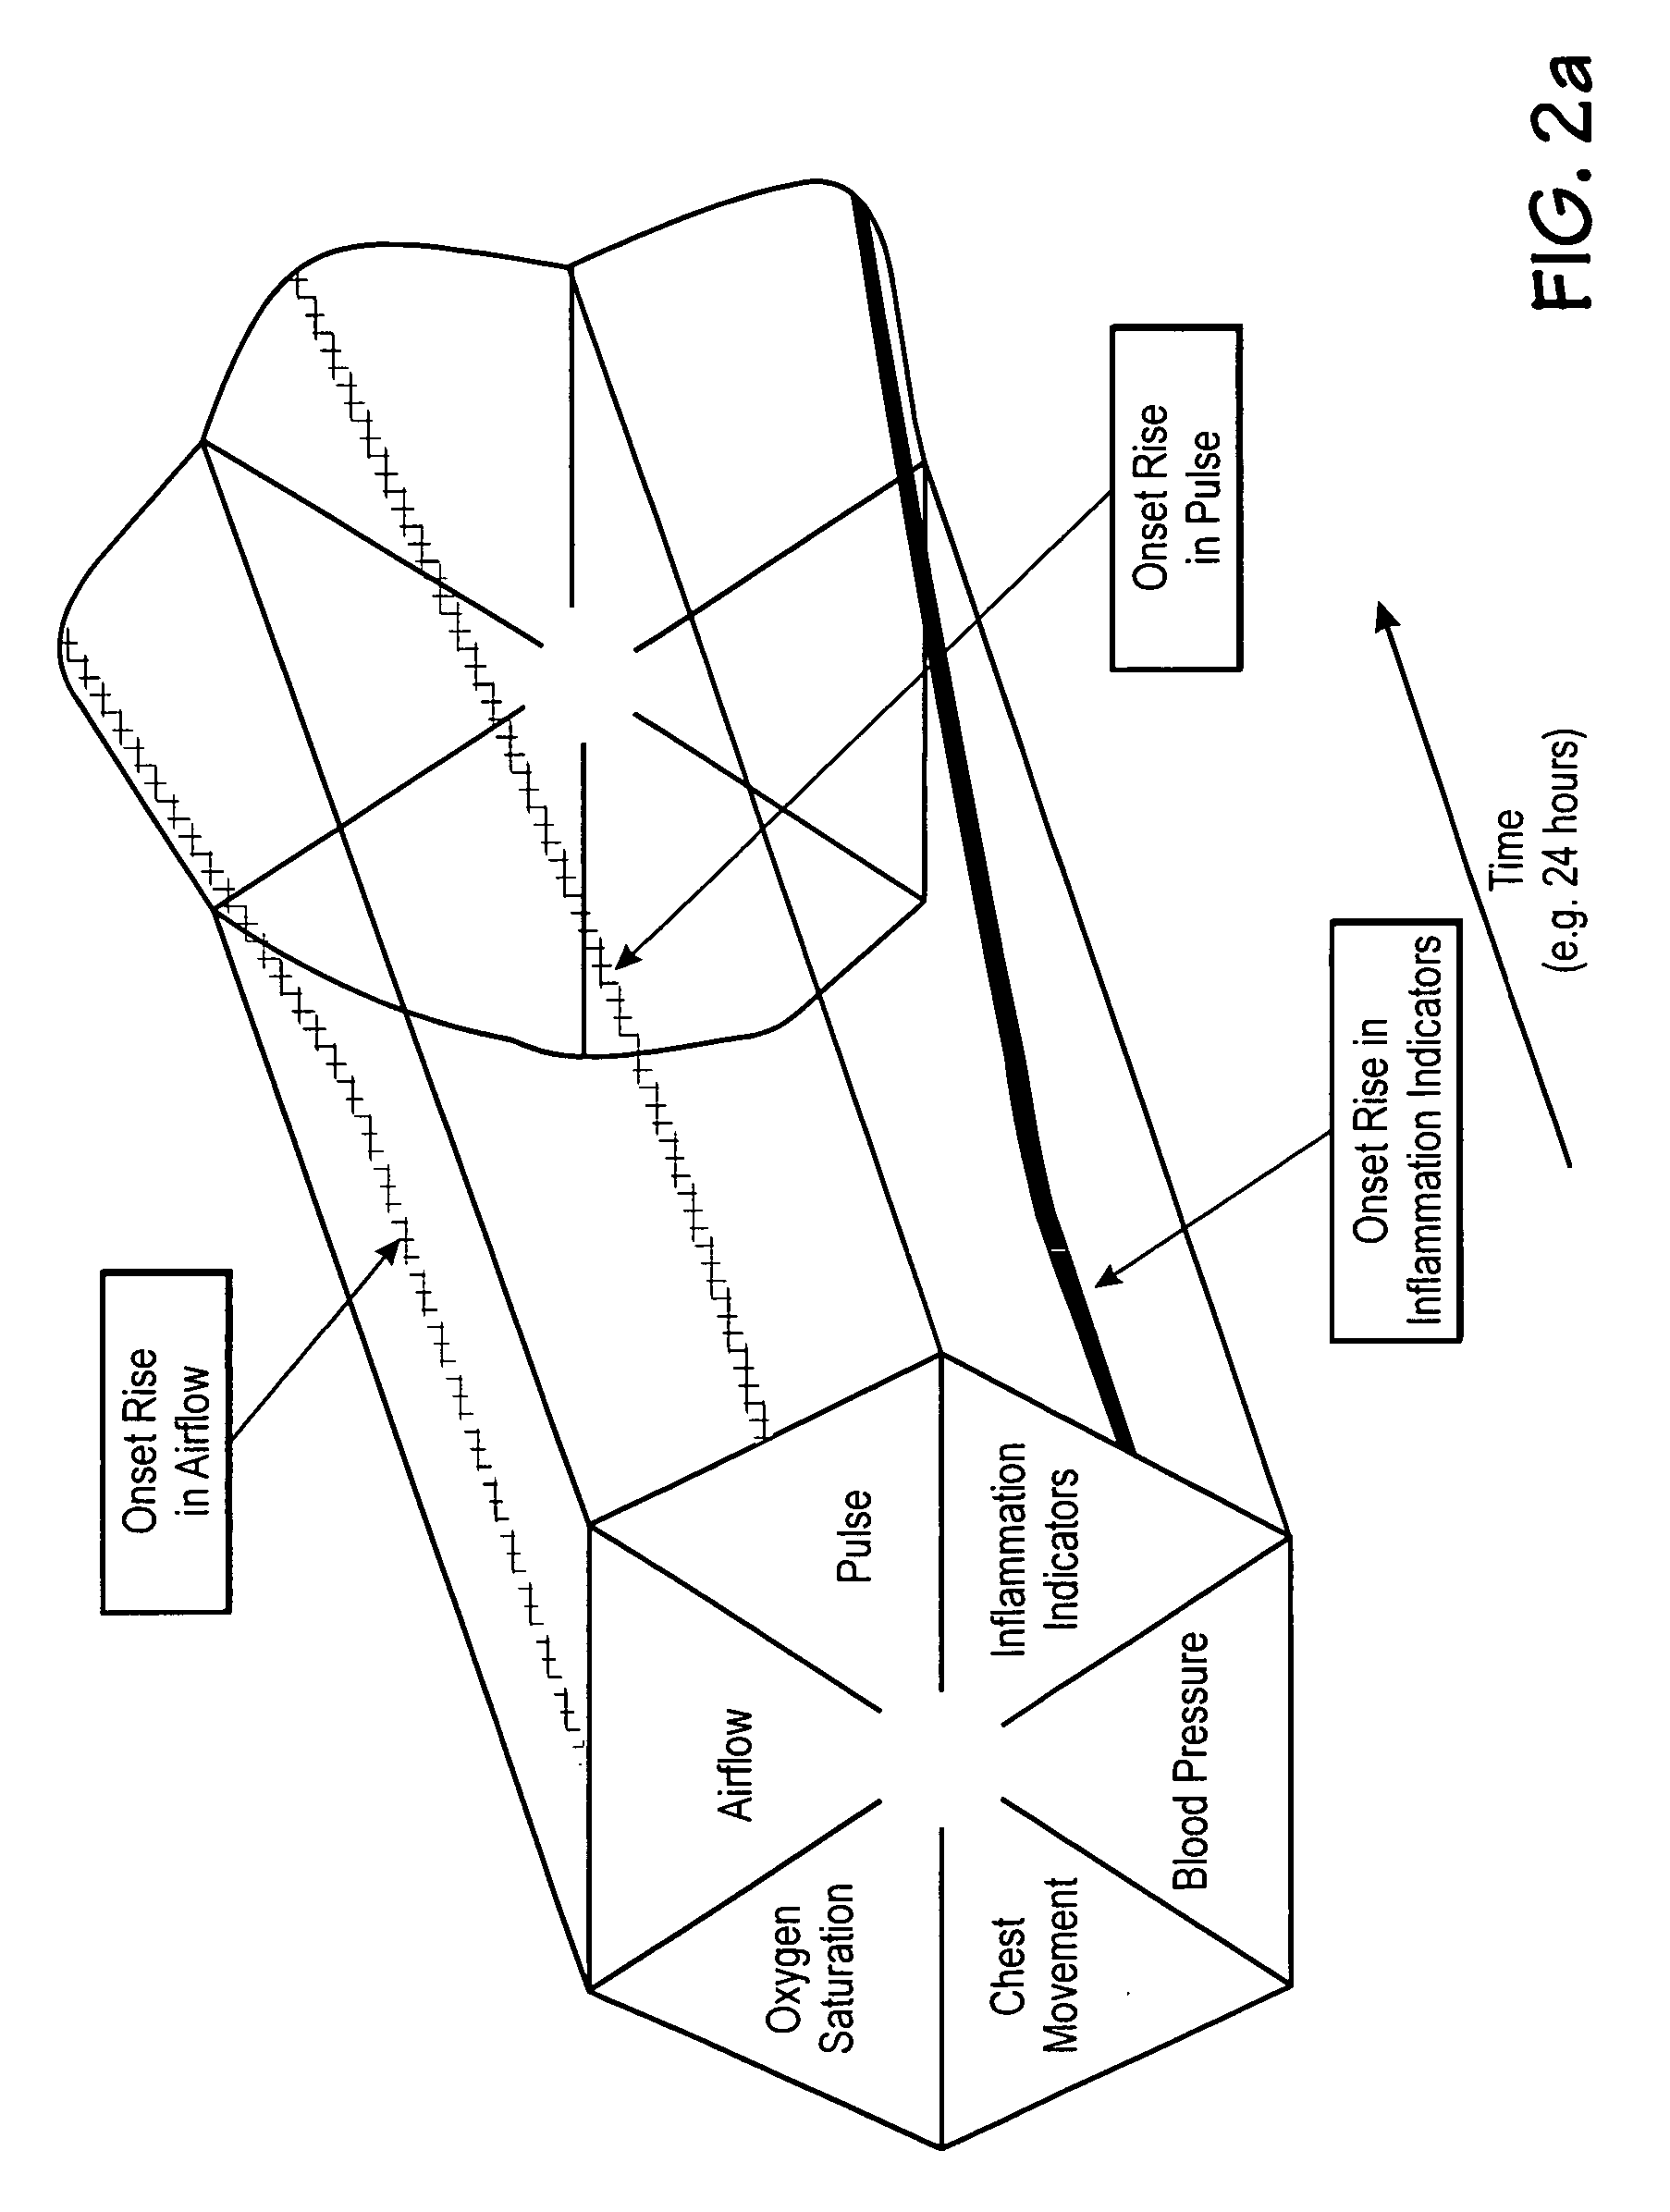 Microprocessor system for the analysis of physiologic and financial datasets